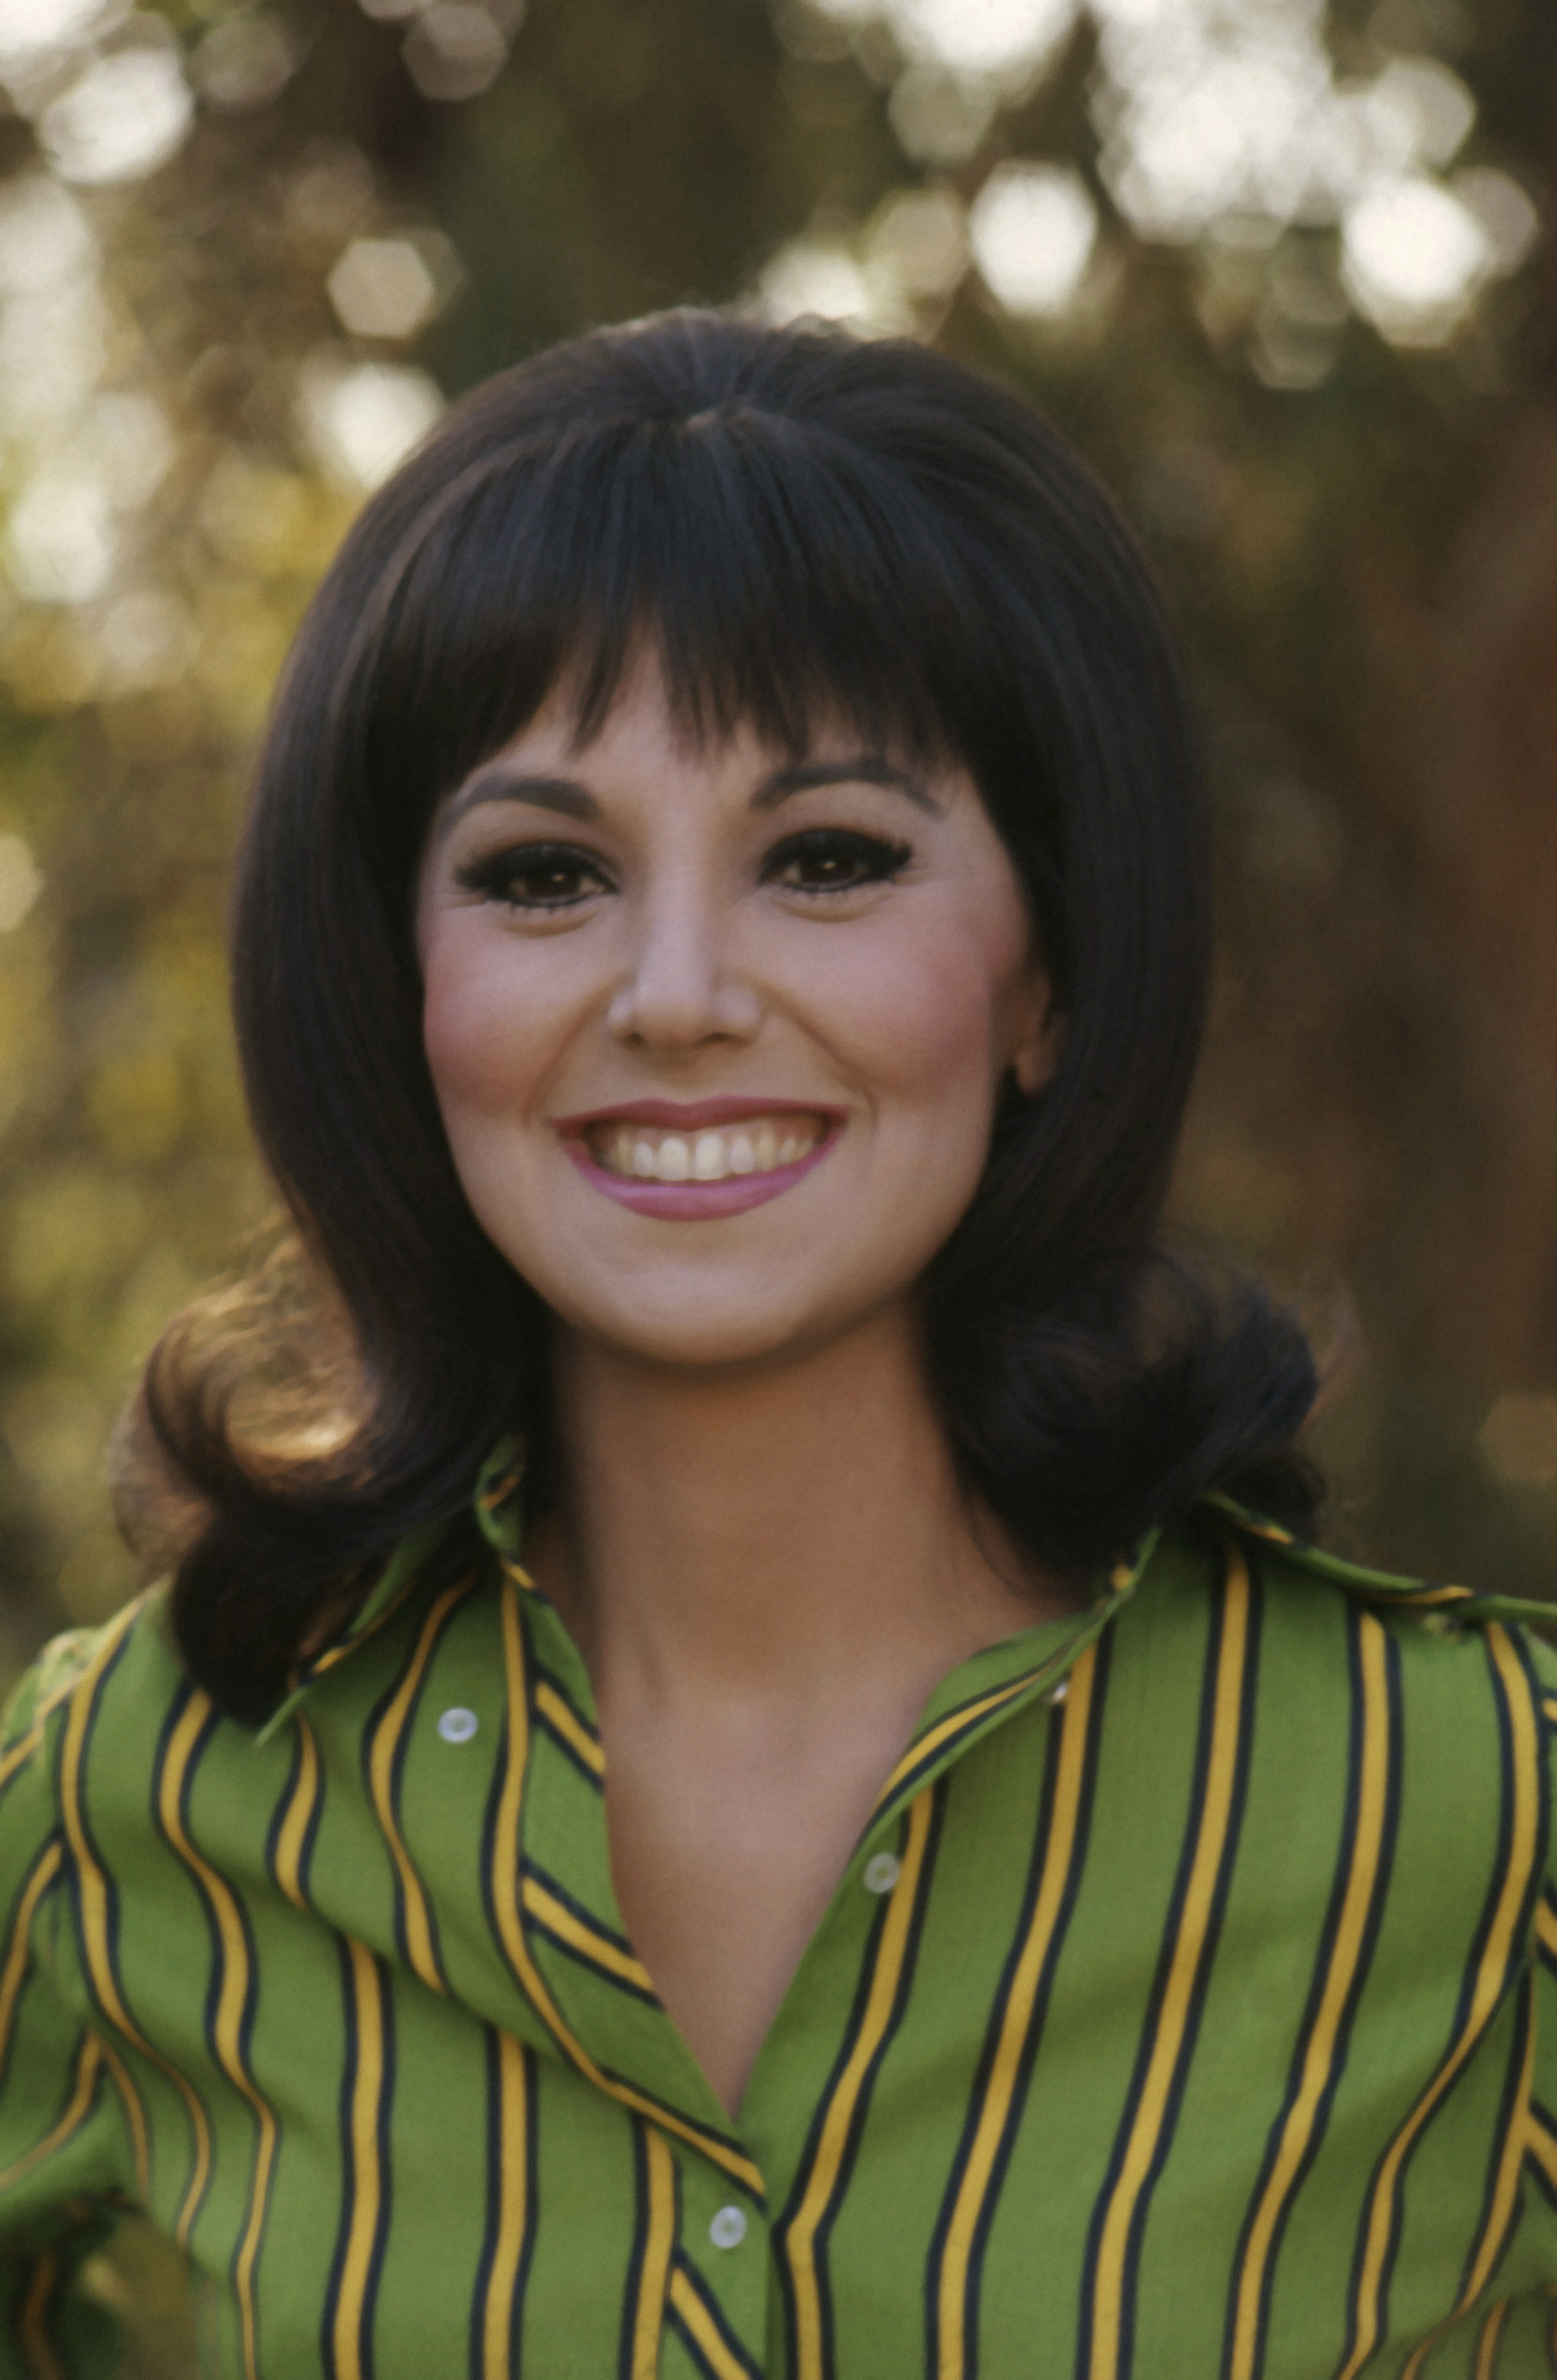 Marlo Thomas smiling publicity portrait for 'That Girl' 1960's TV series. | Source: Getty Images